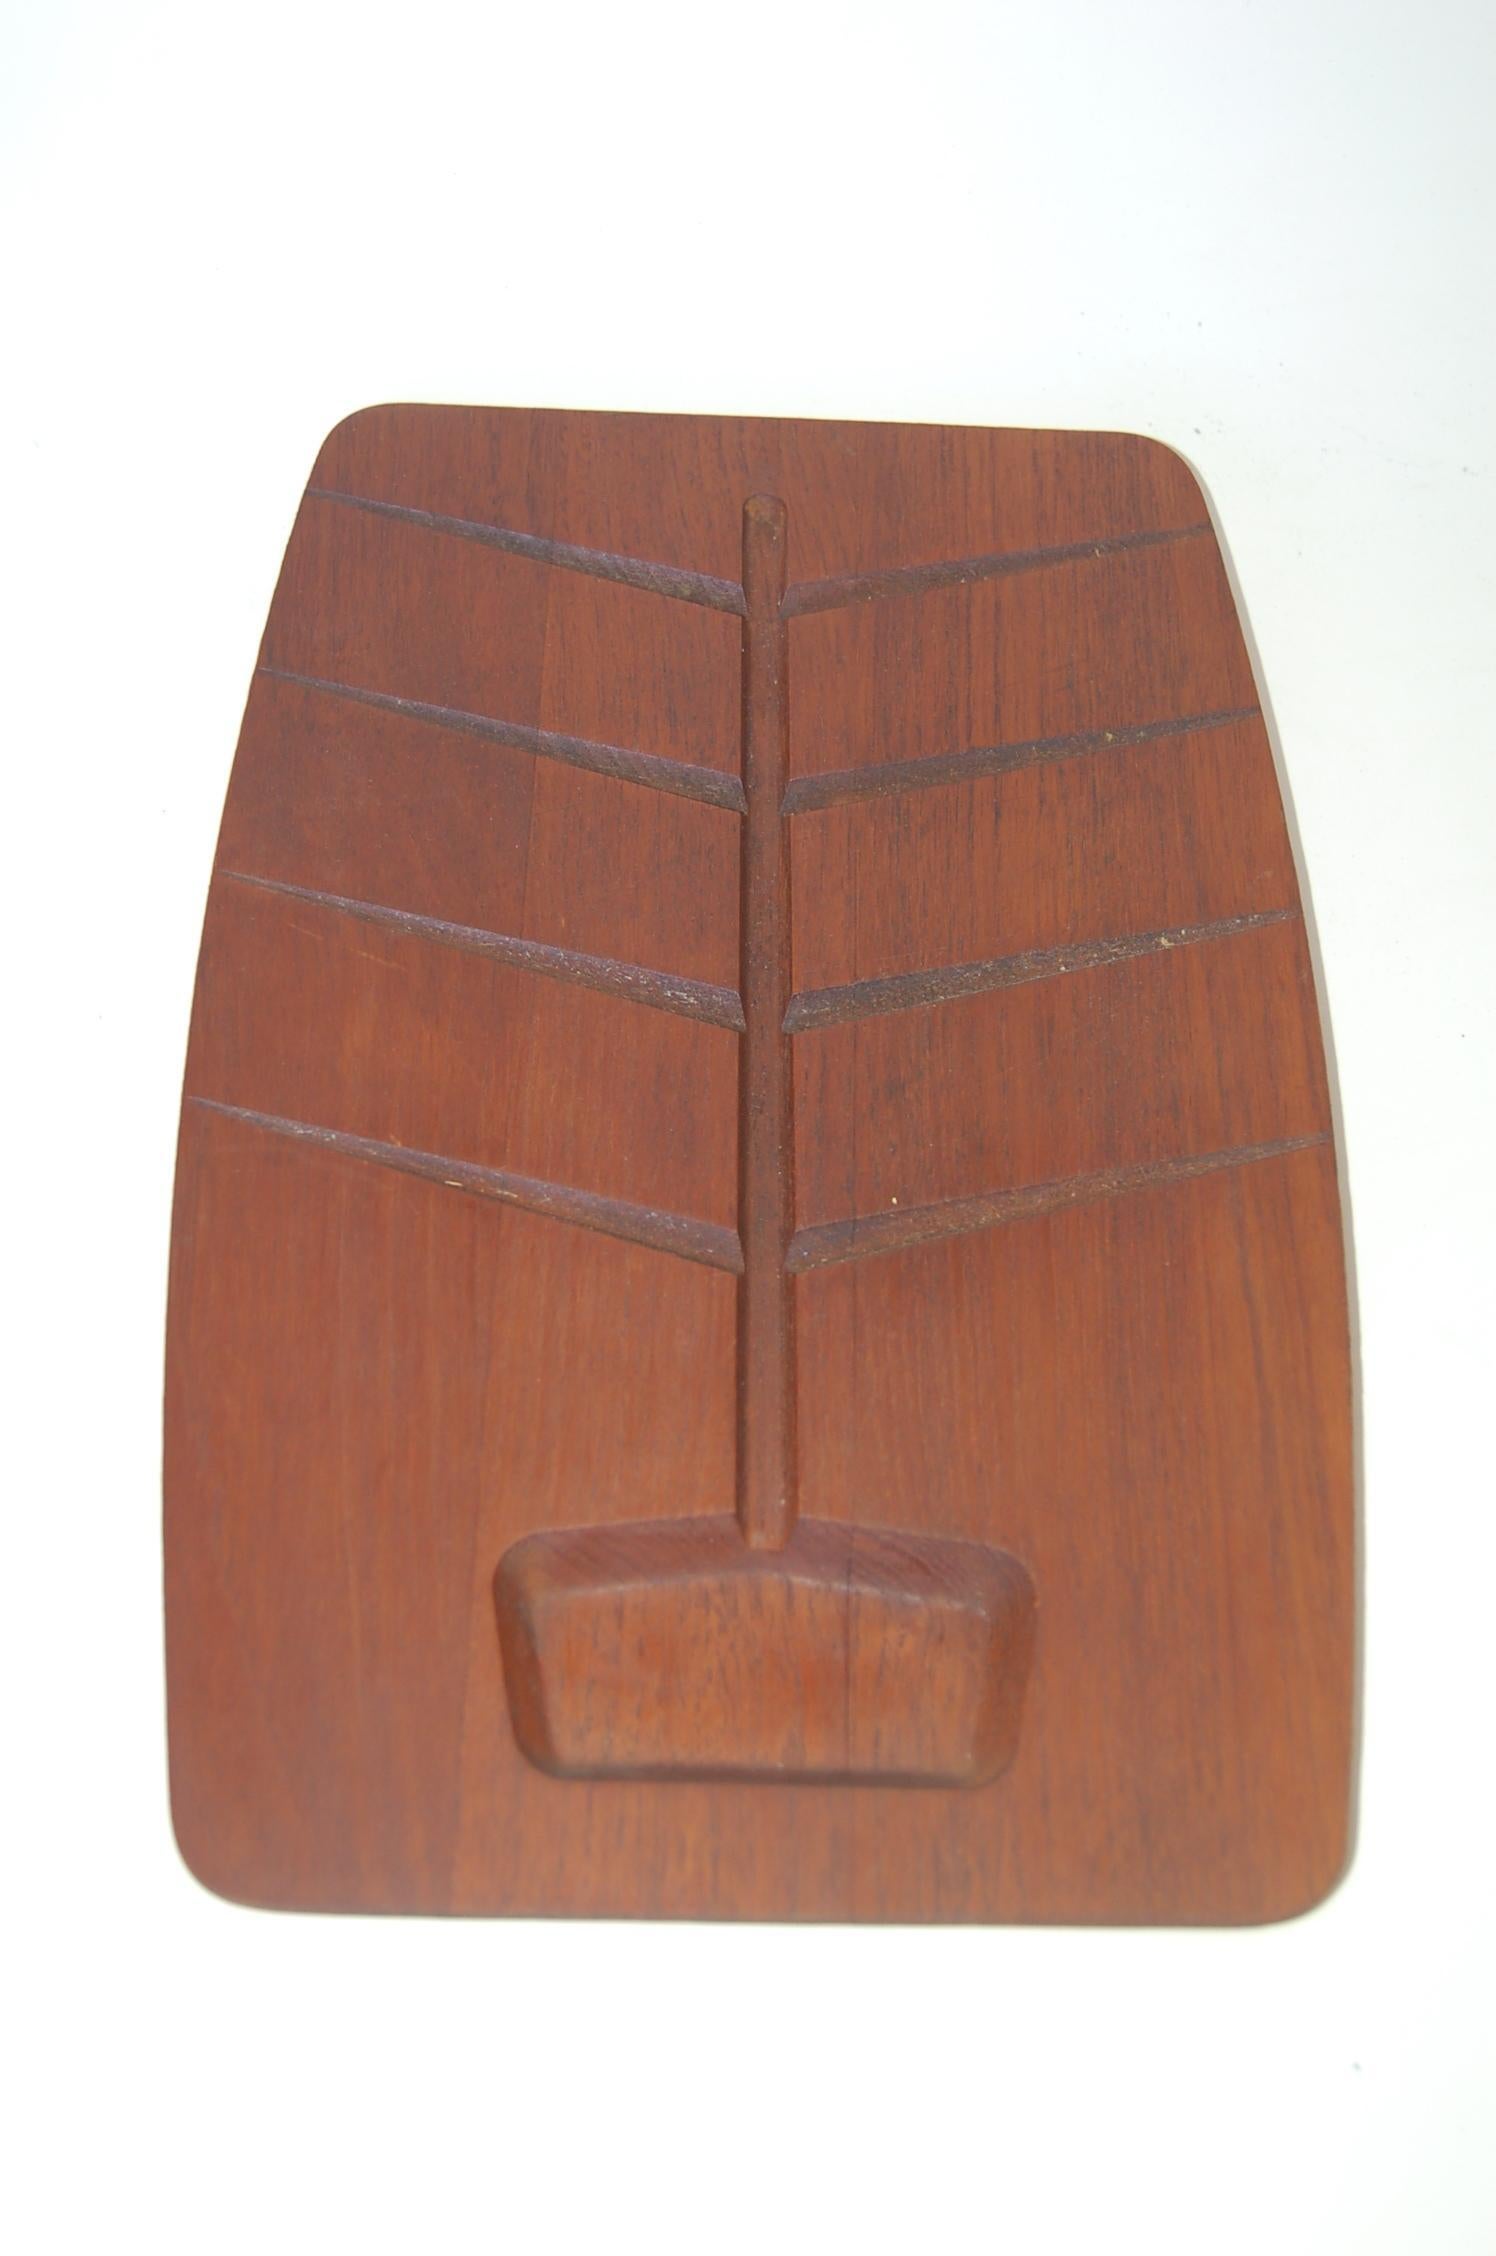 Brushed Danish Modern Two-Piece Teak Cutting Board with Stainless Steel Tray